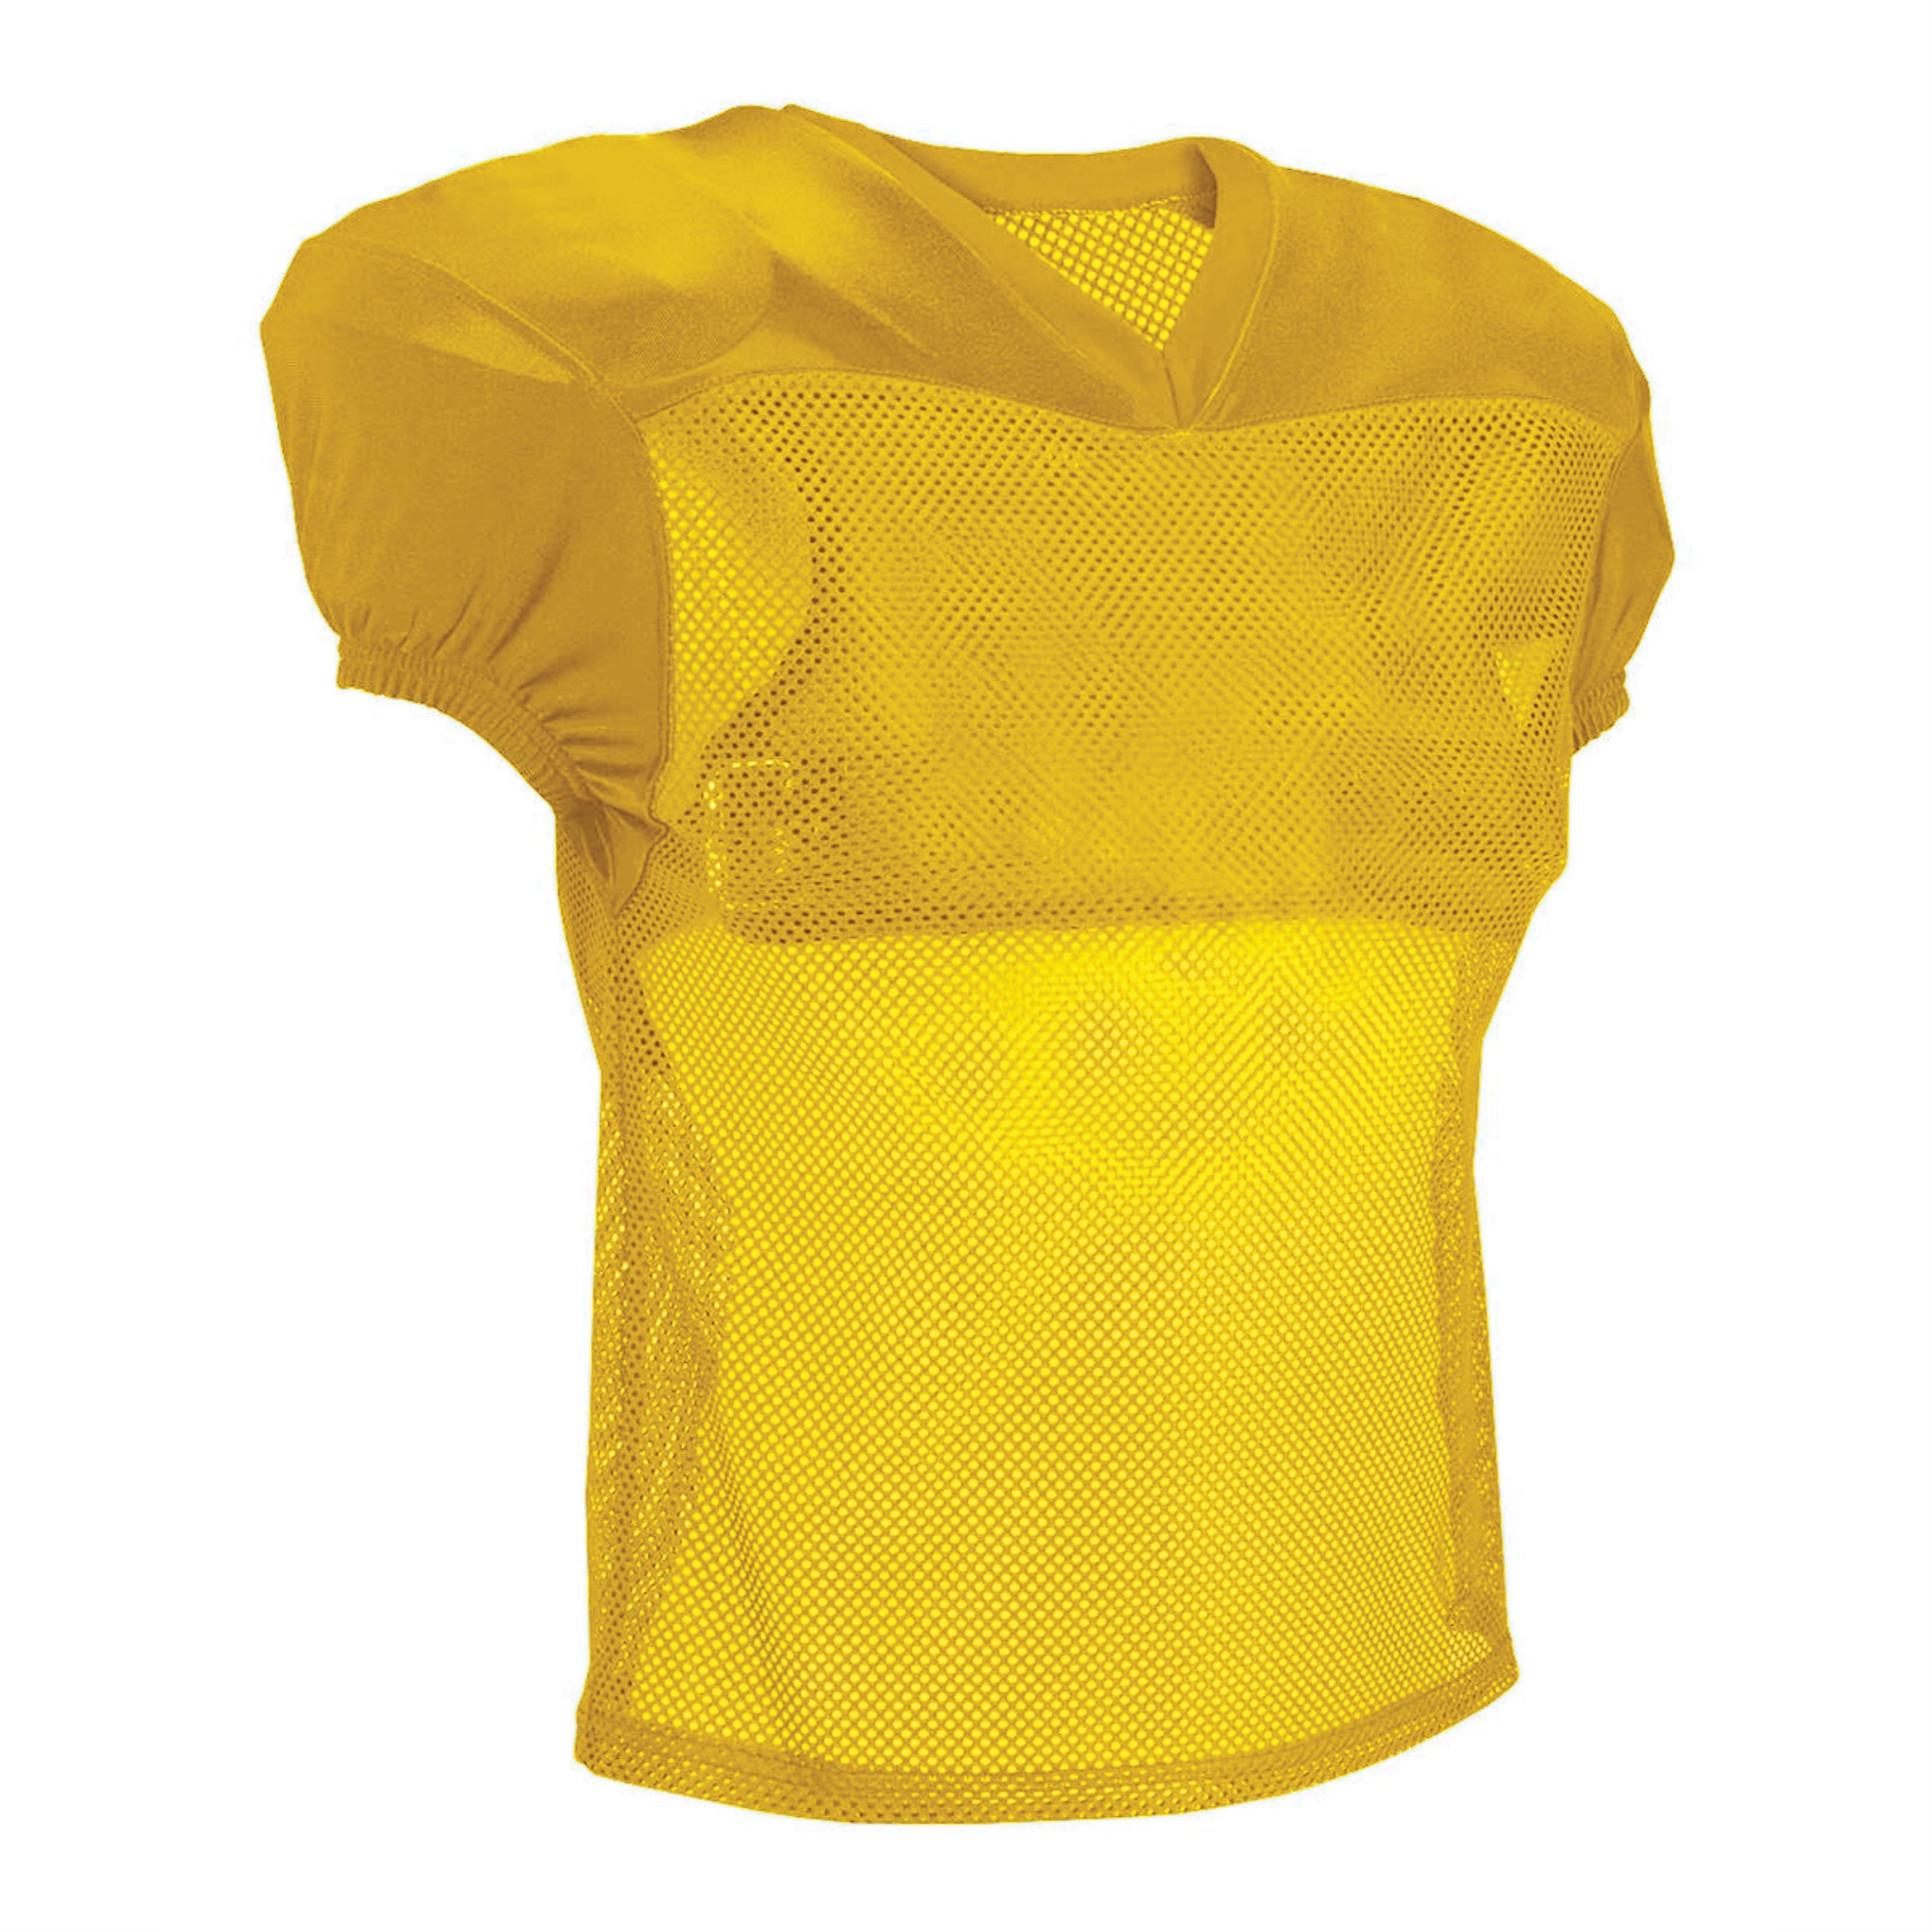 Martin Sports ADULT PRACTICE JERSEY-GOLD-L/XL